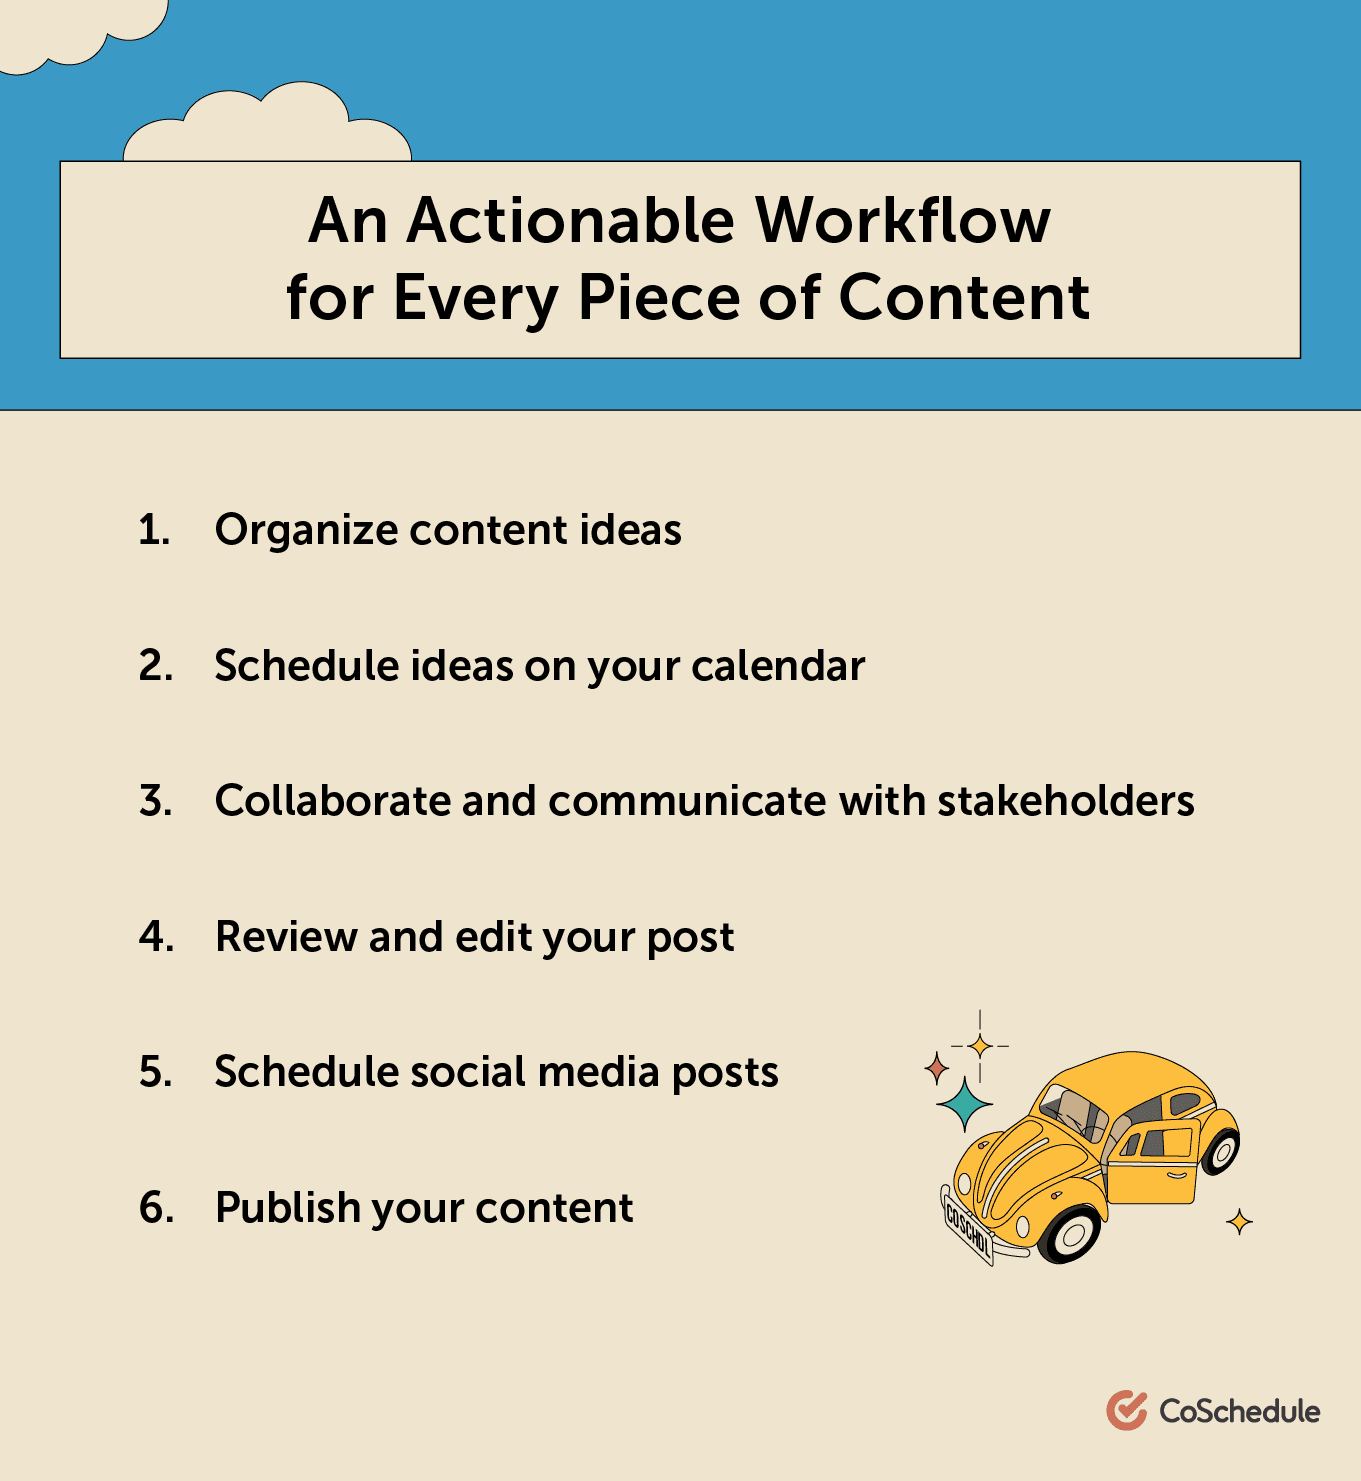 Create an actionable workflow for every piece of content